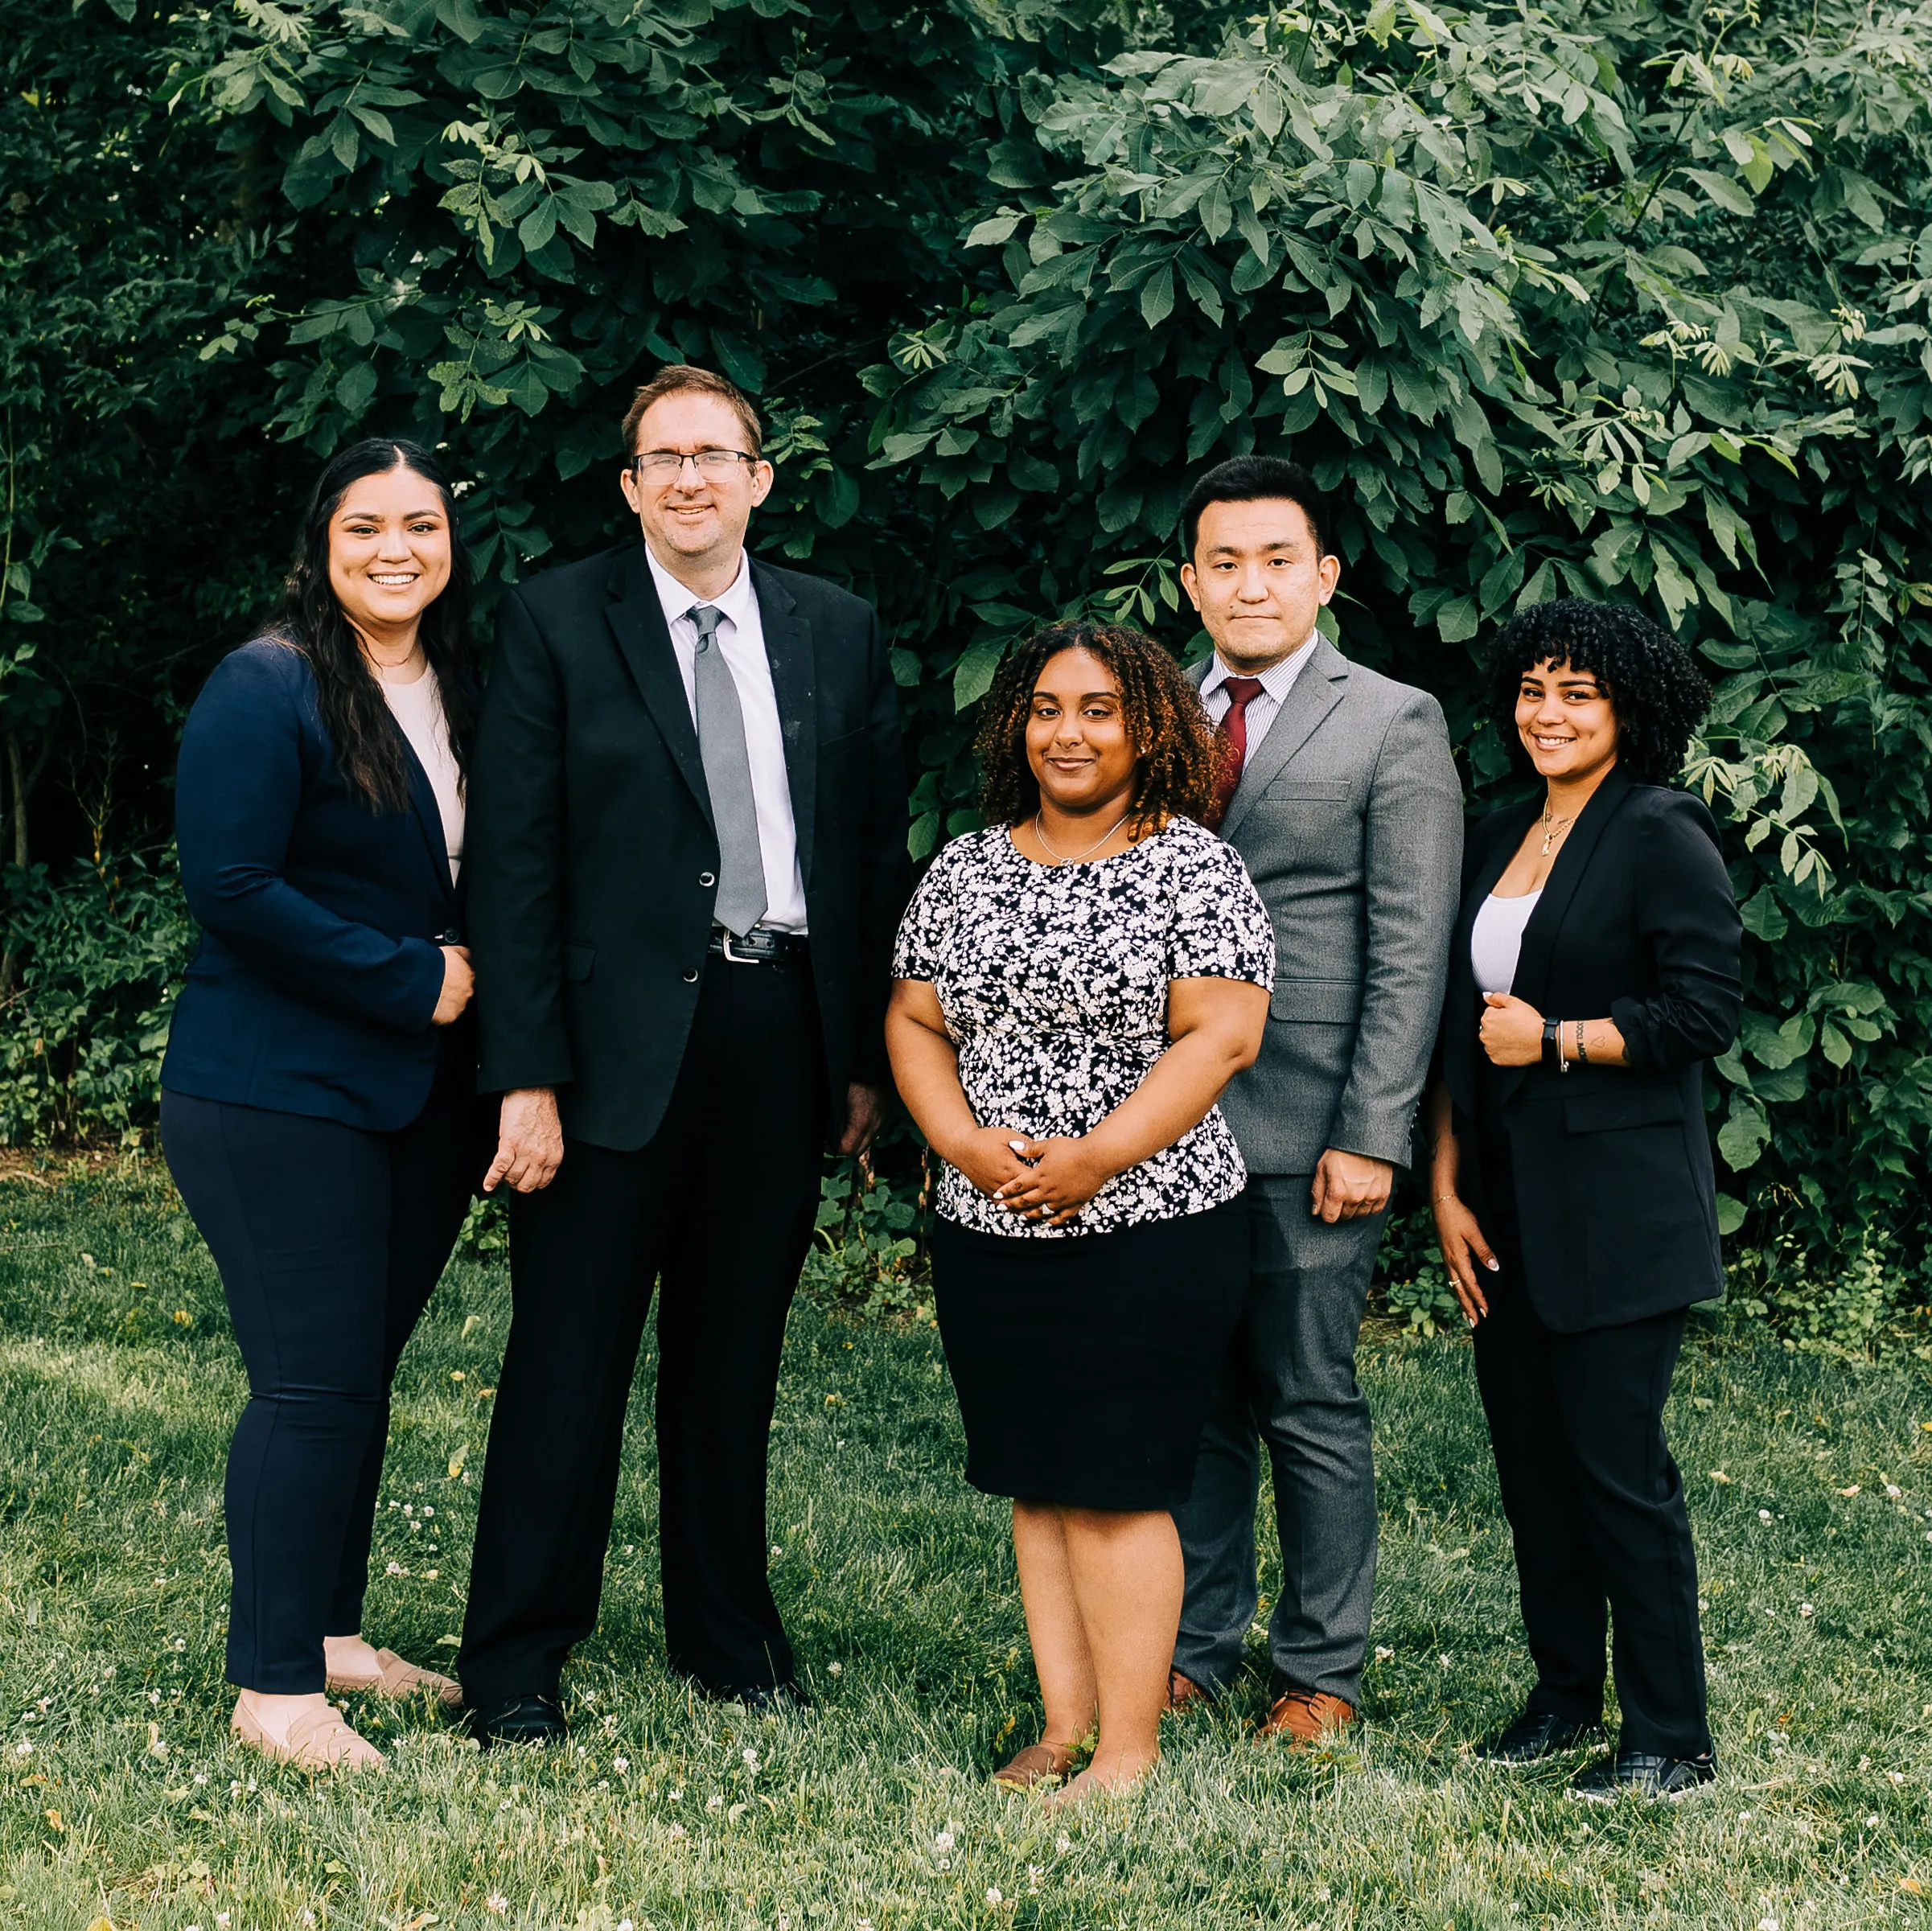 The two attorneys and 3 staff that make up the immigration team at Cornerstone Law Firm